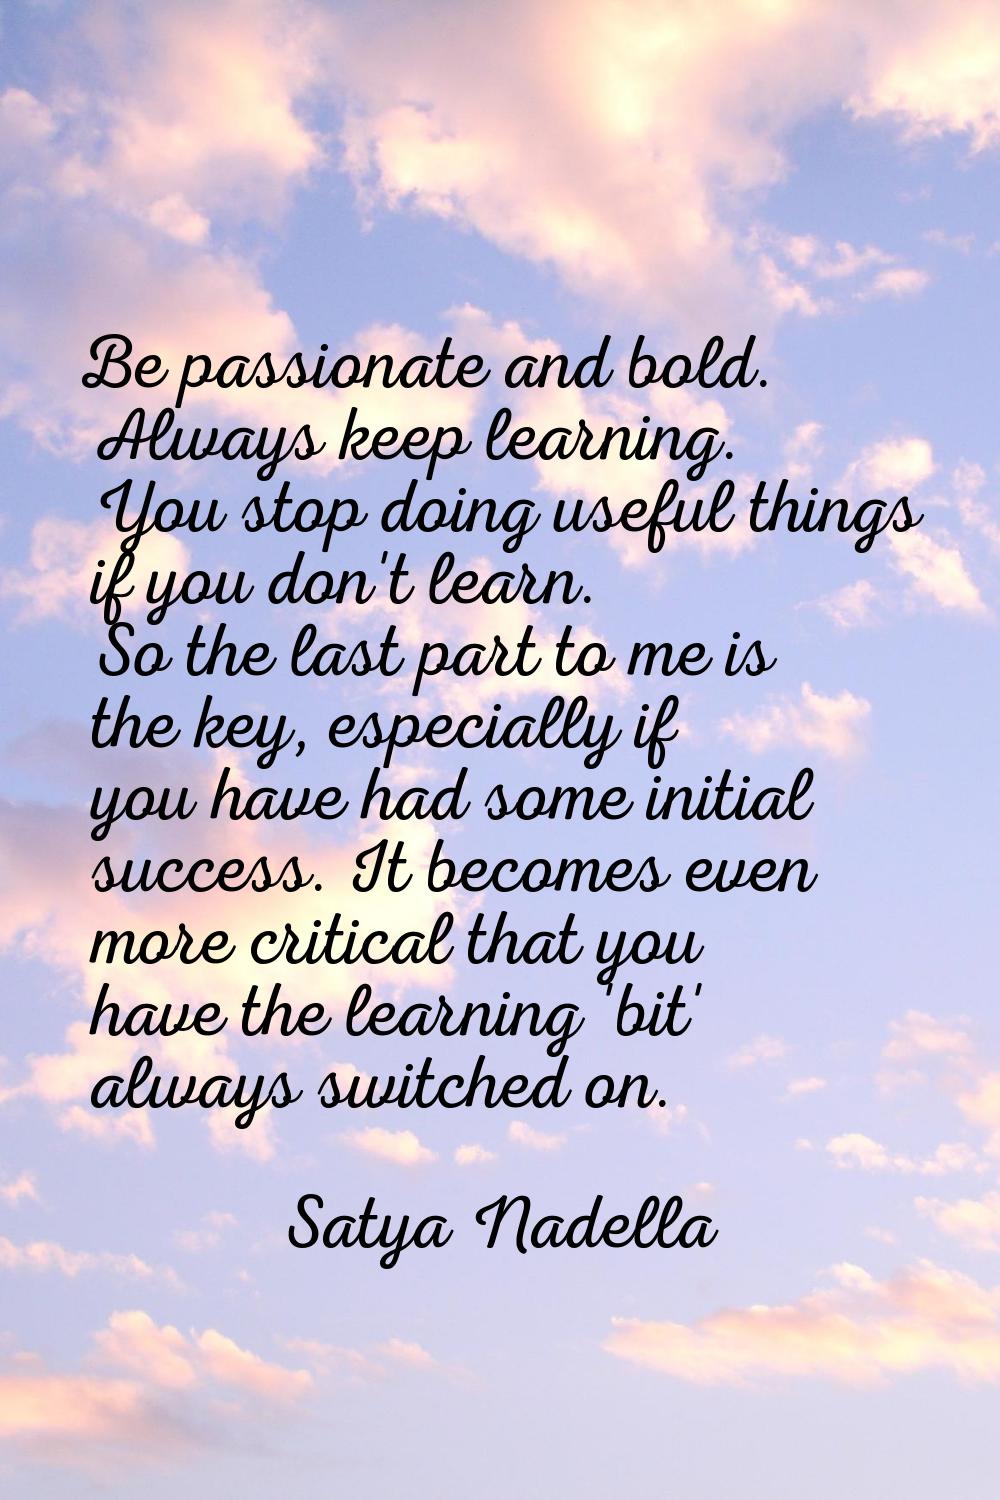 Be passionate and bold. Always keep learning. You stop doing useful things if you don't learn. So t